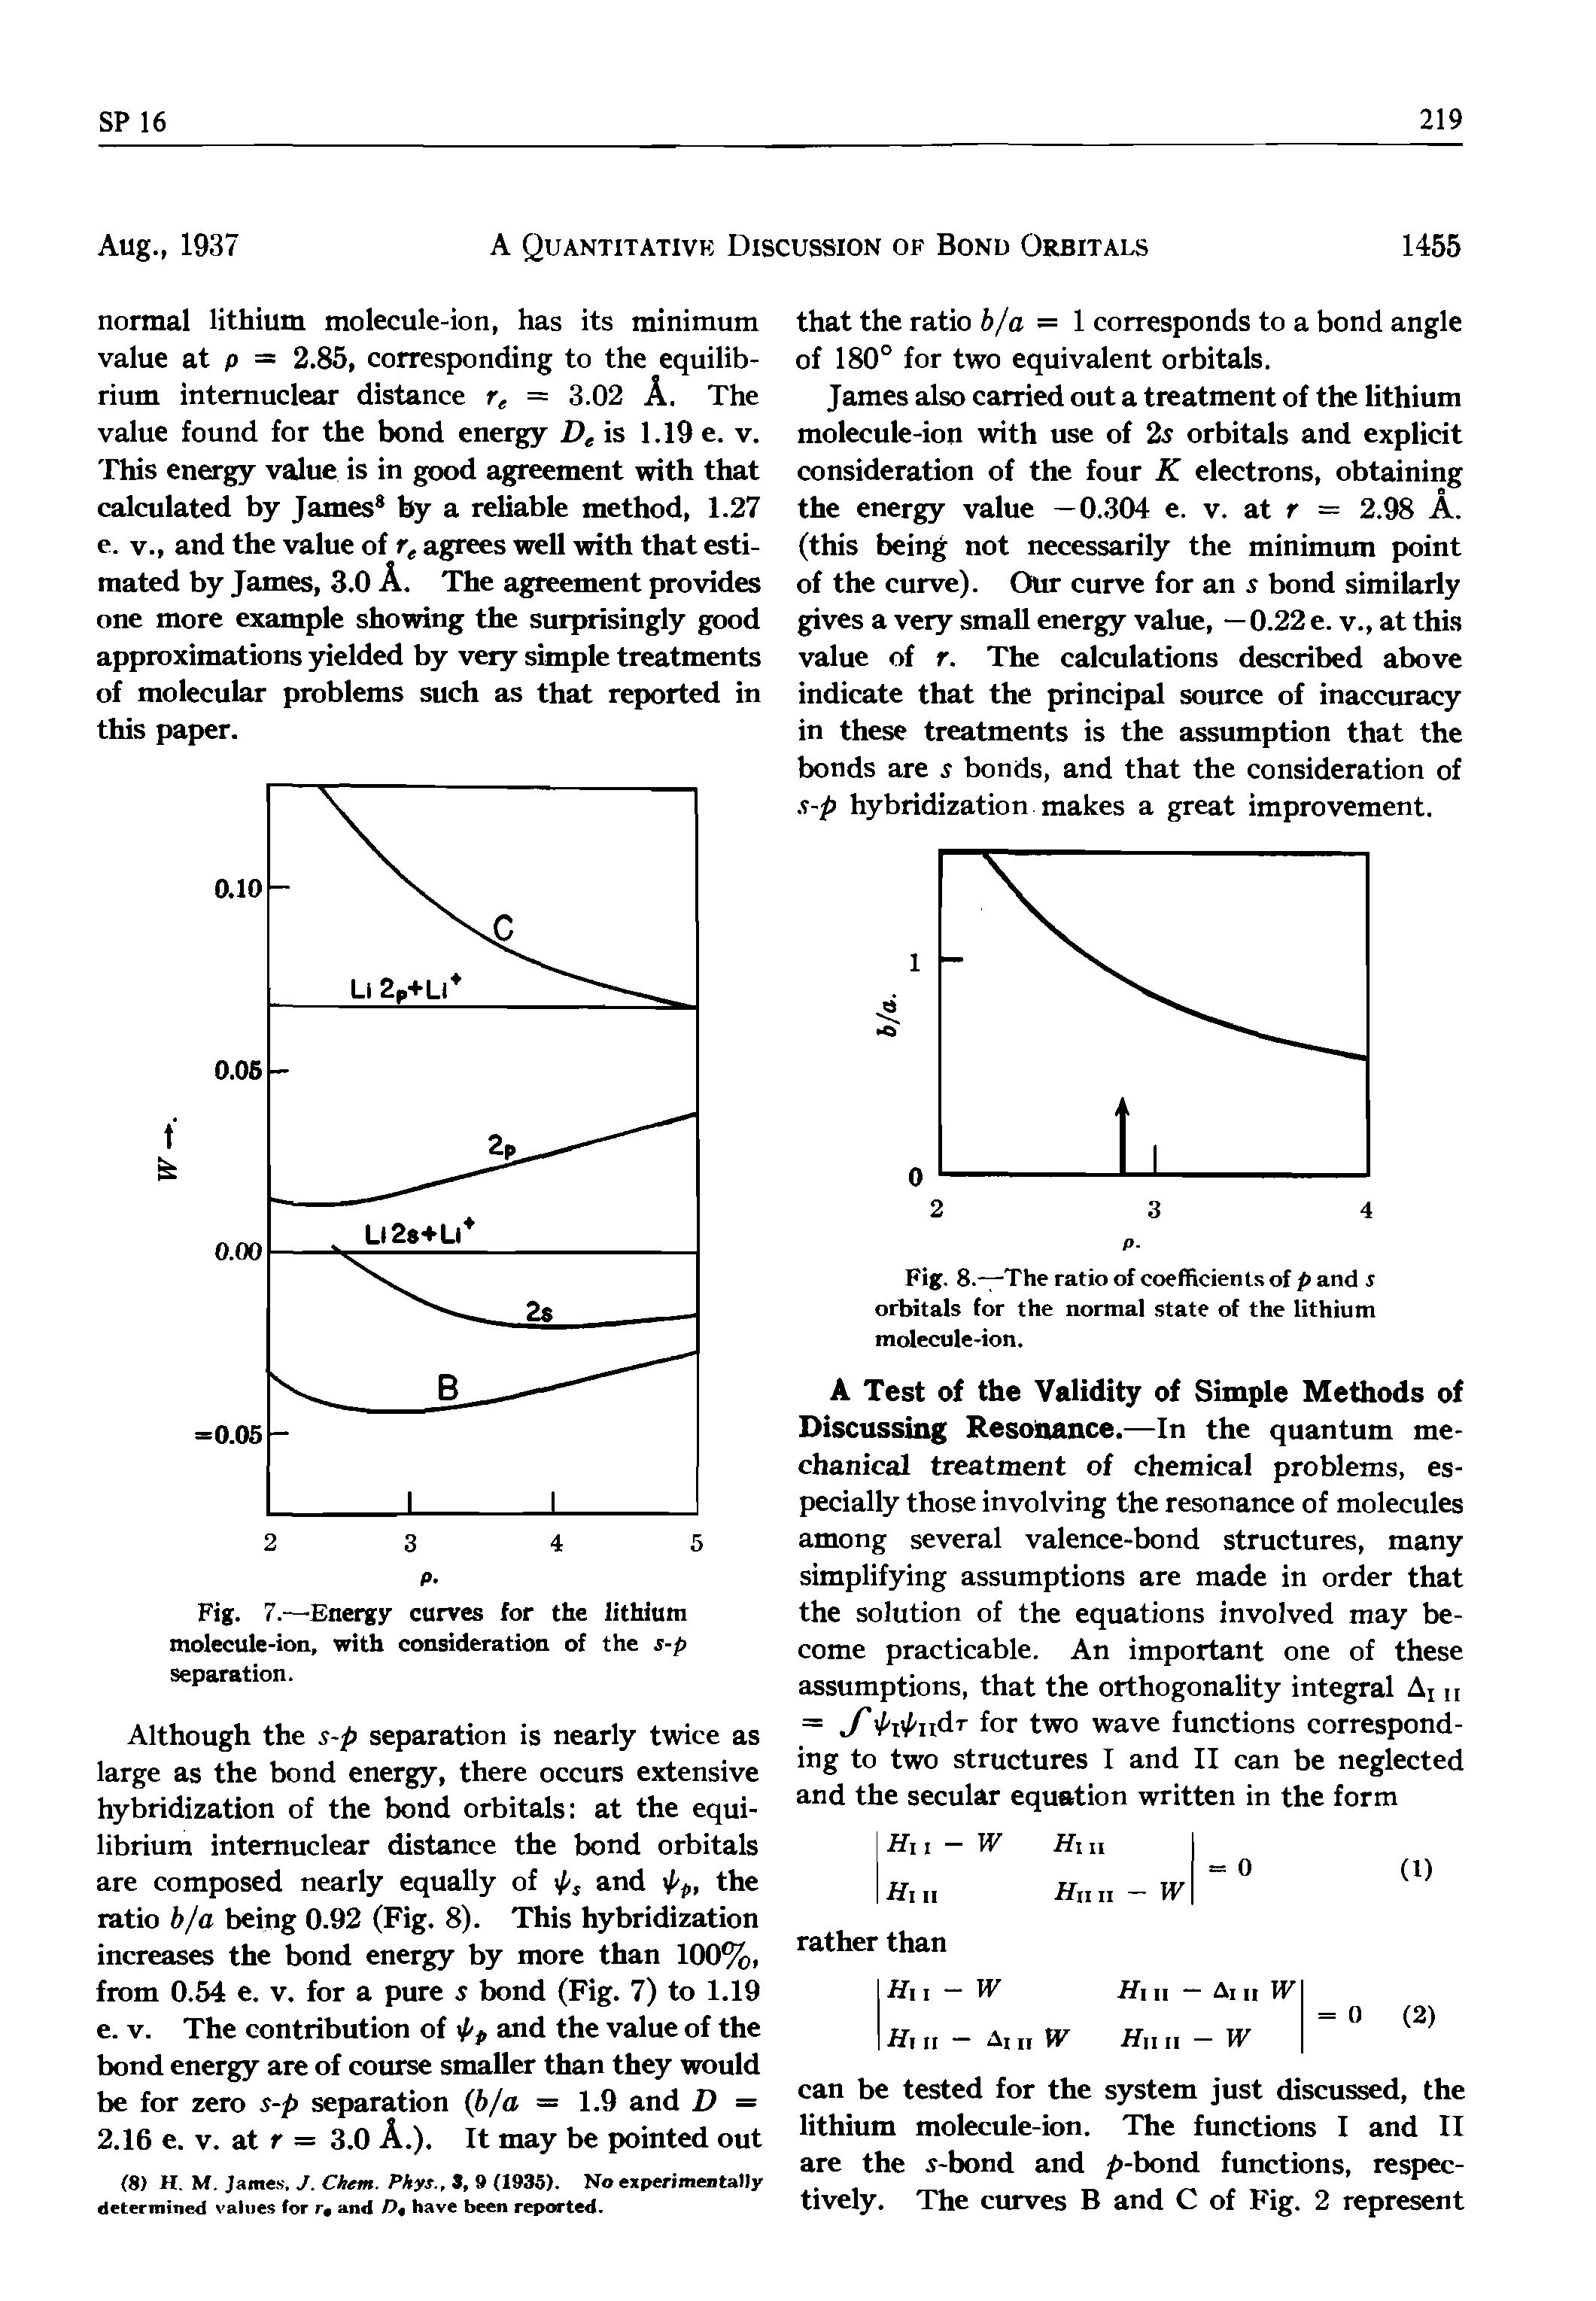 Fig. 8.—-The ratio of coefficients of p and s orbitals for the normal state of the lithium molecule-ion.